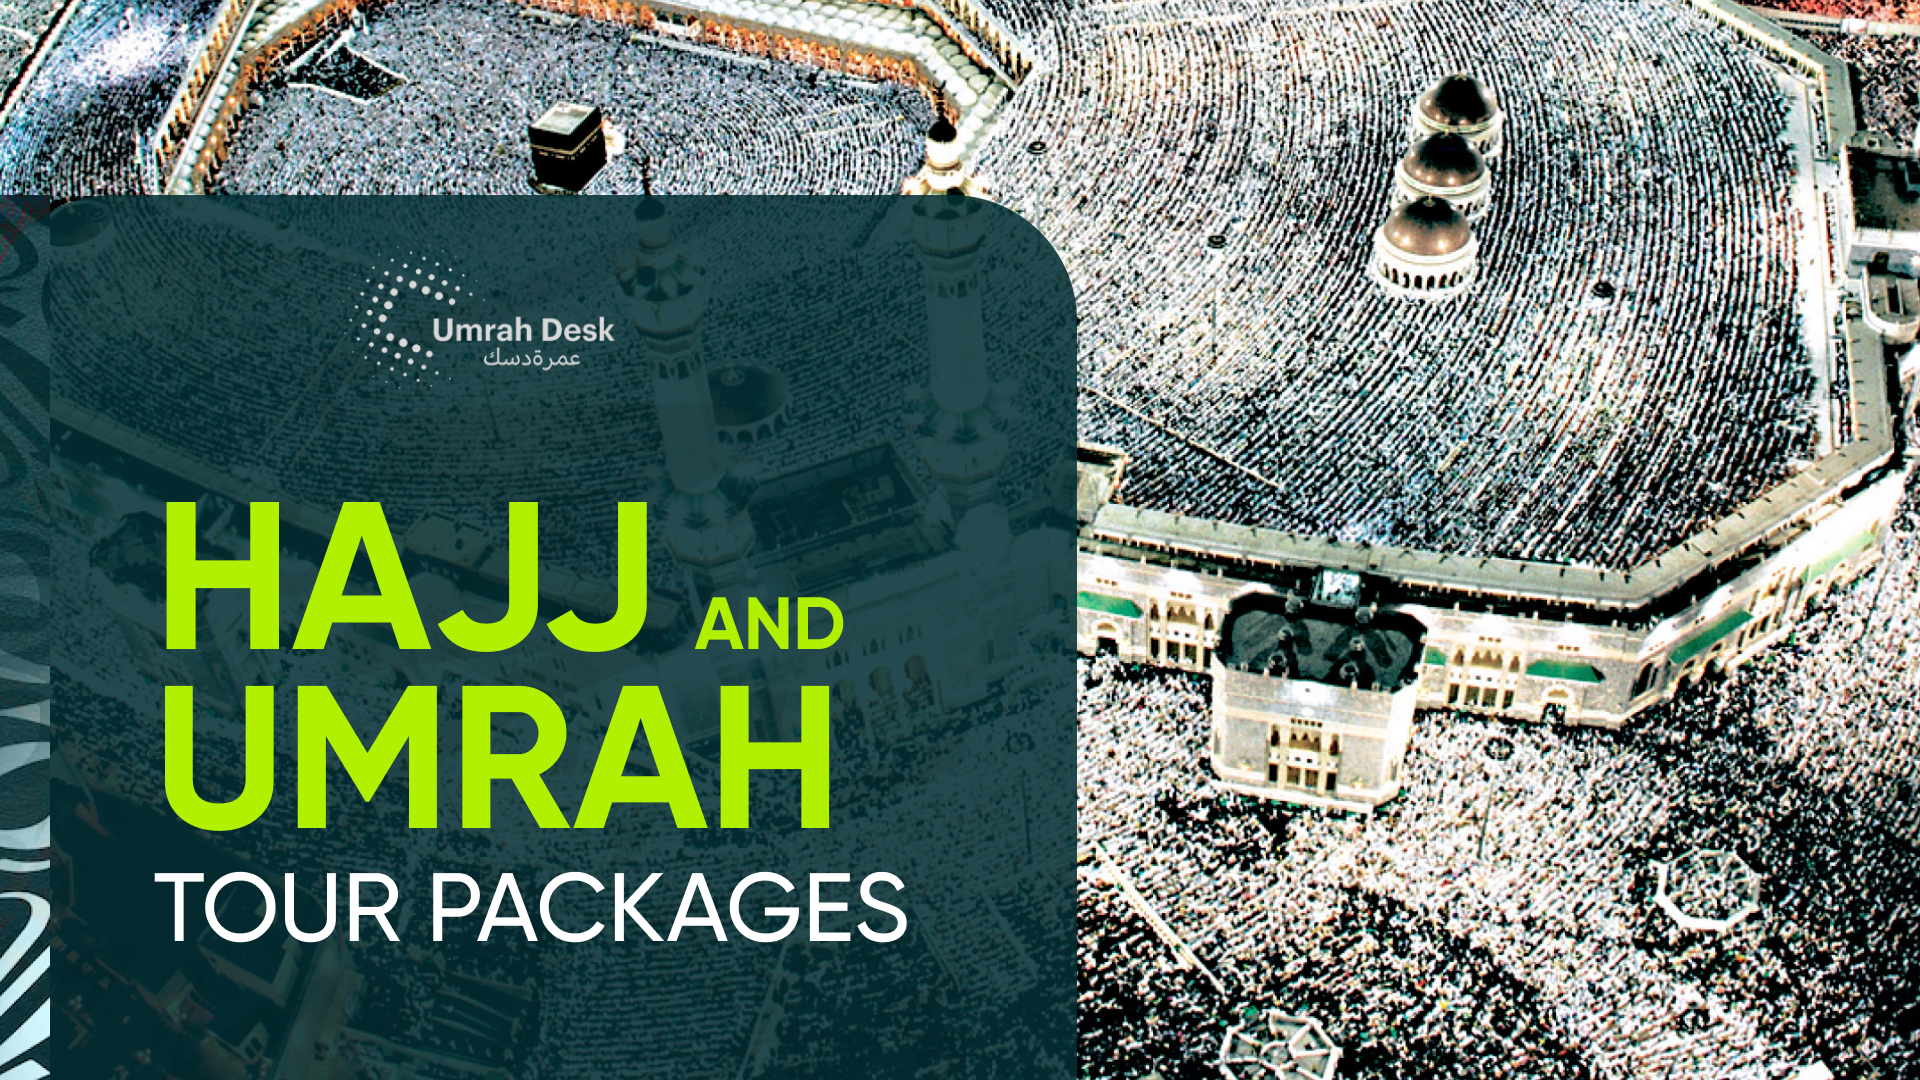 Hajj and umrah tour packages